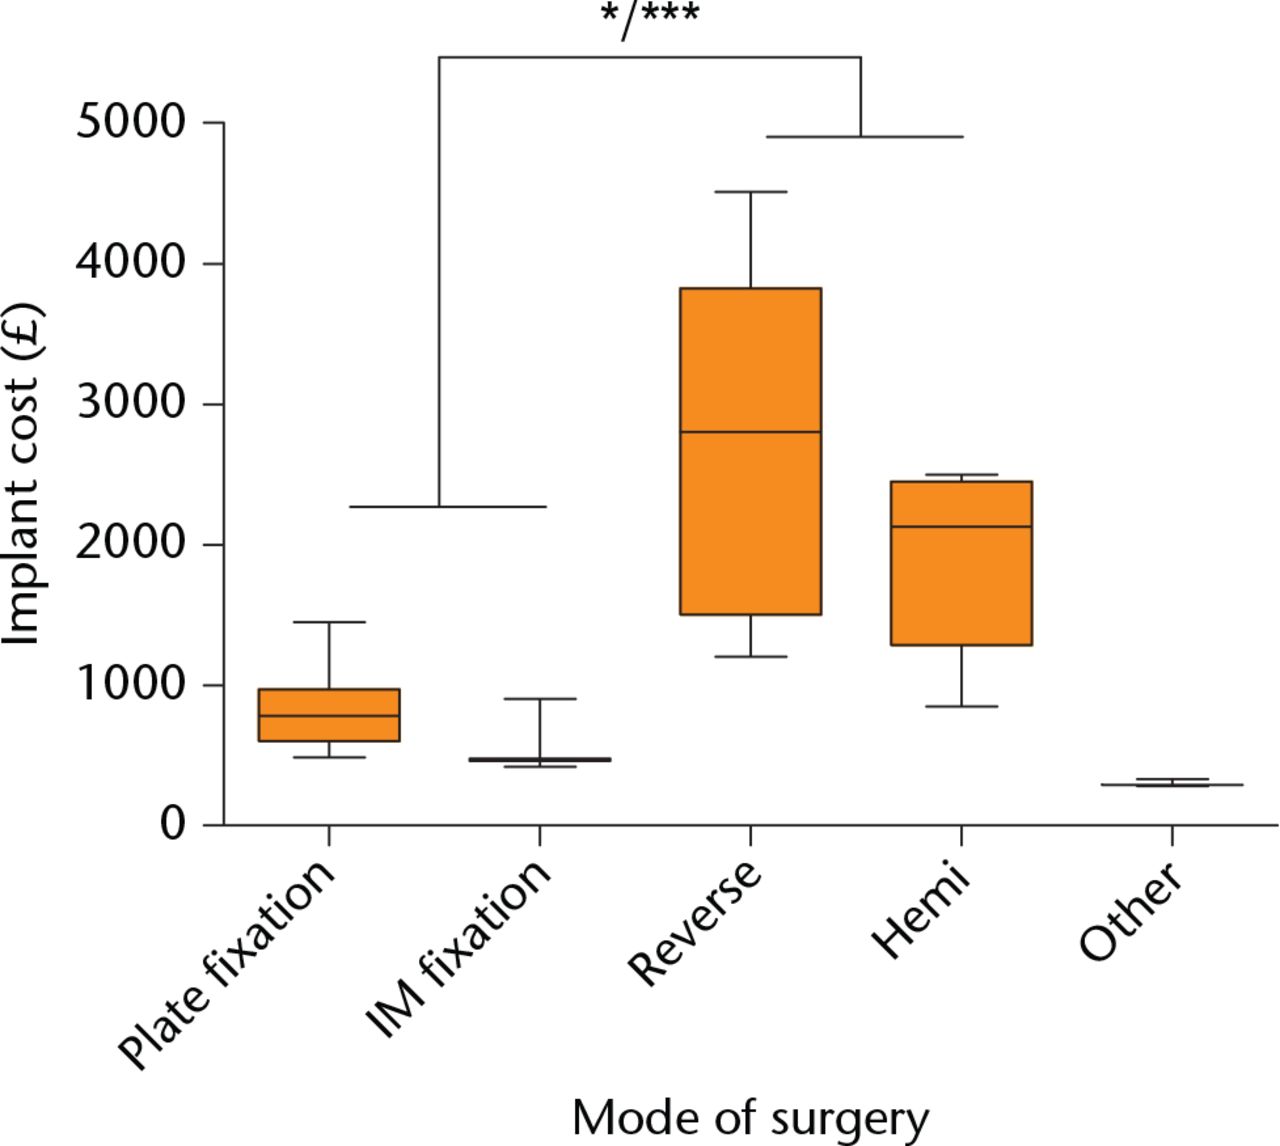 Fig. 2 
            Box and whisker plot demonstrating the relative implant costs of the different modes of surgery groups. The boxes represent median and interquartile range, while the whiskers represent range. Statistical significance denoted by *p < 0.05, **p < 0.01, ***p < 0.0001 (Dunn’s multiple comparison test).
          